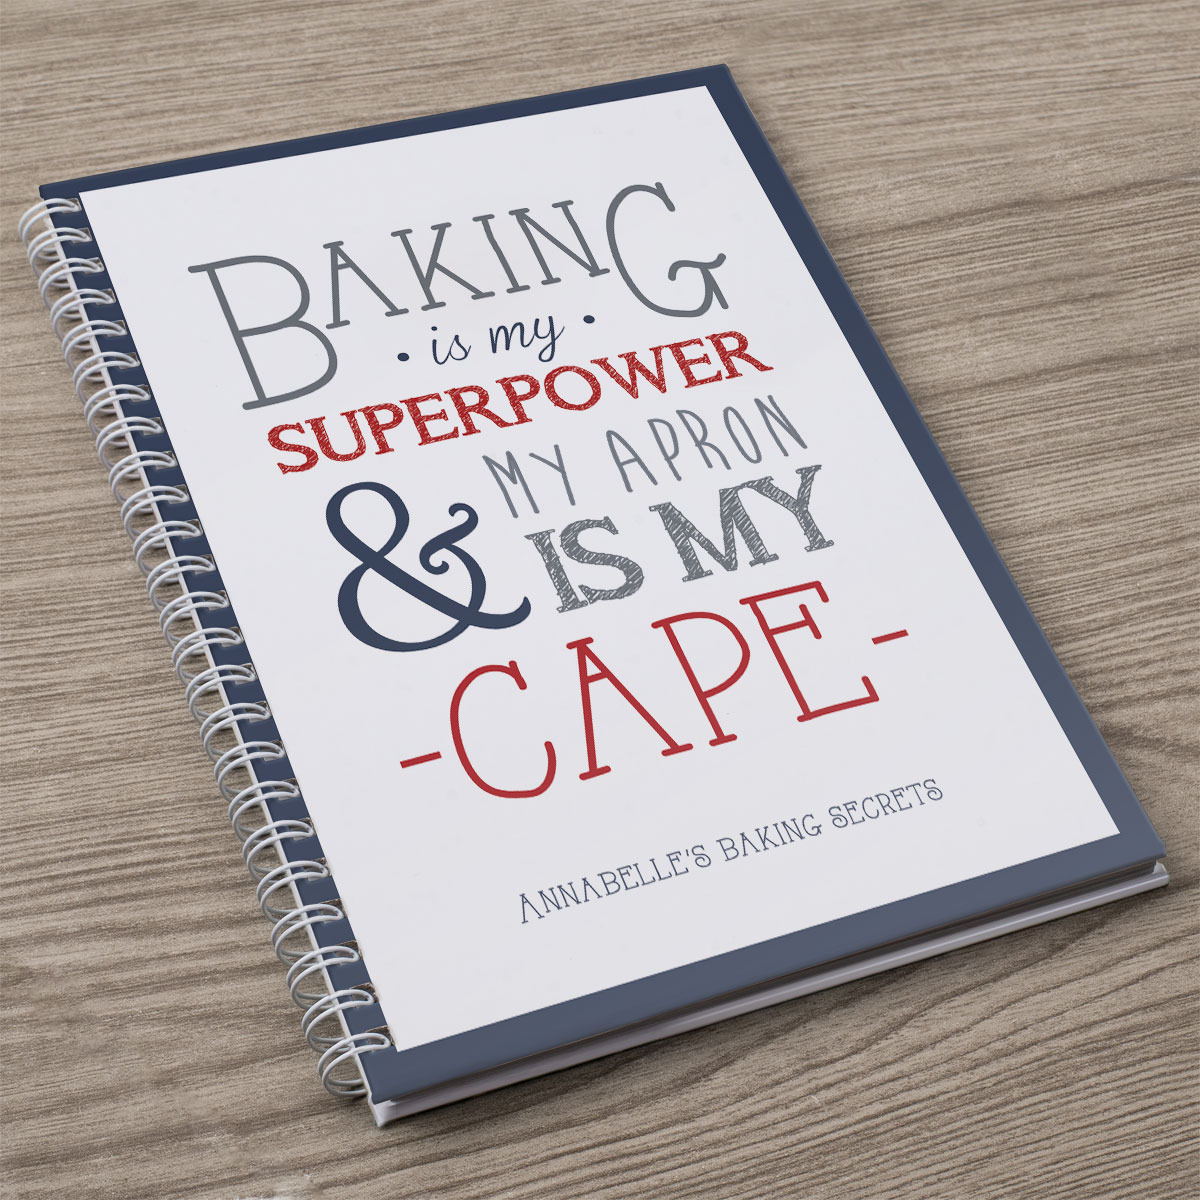 Personalised Notebook - Baking Is My Superpower